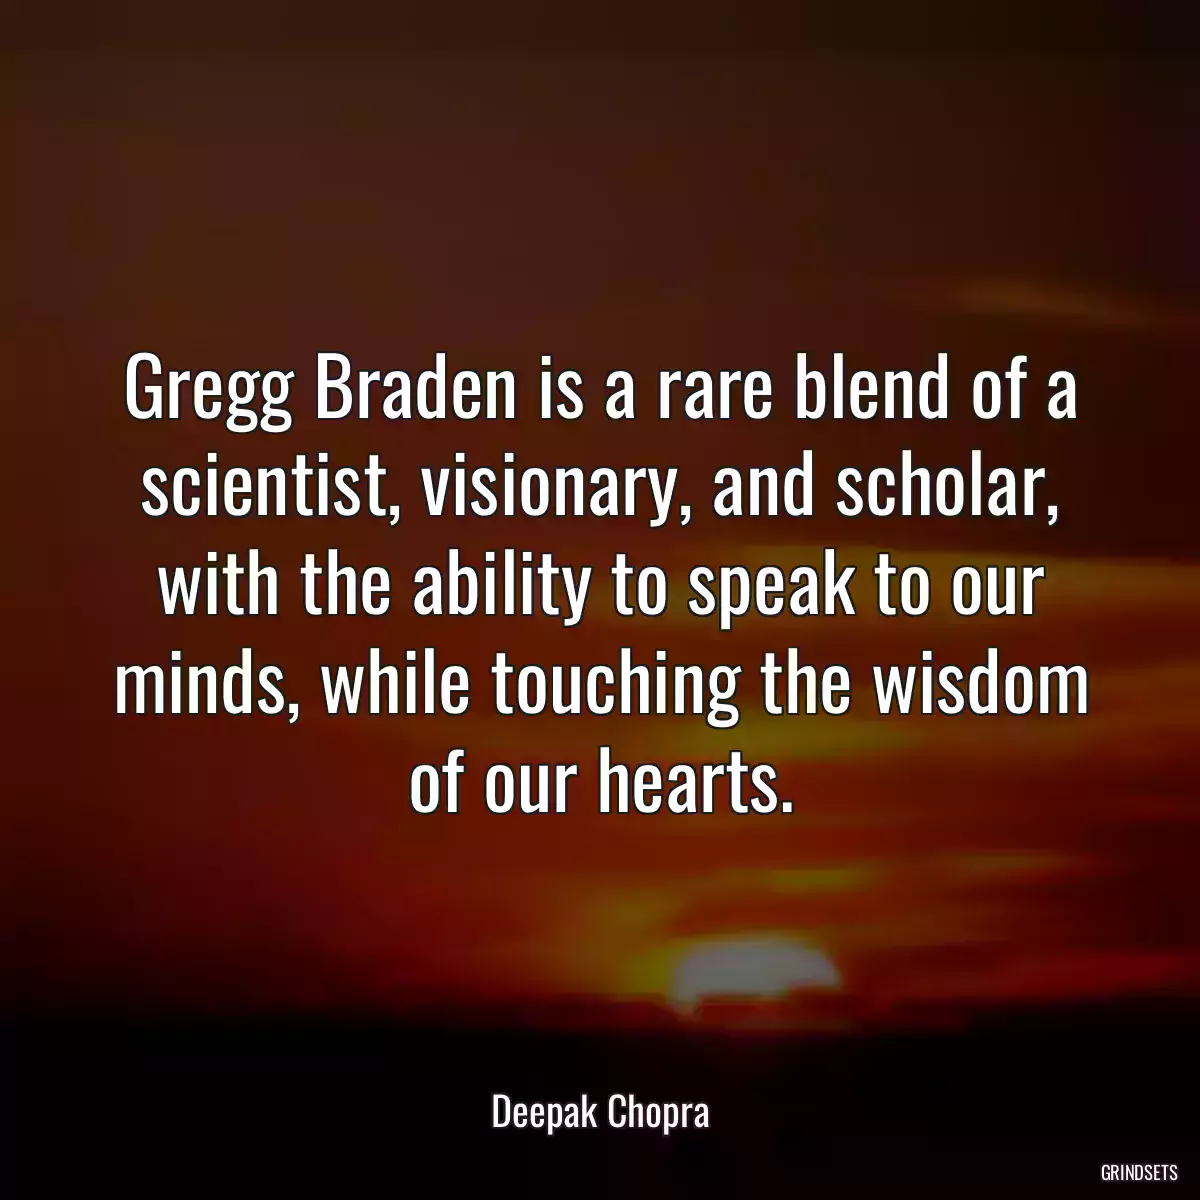 Gregg Braden is a rare blend of a scientist, visionary, and scholar, with the ability to speak to our minds, while touching the wisdom of our hearts.